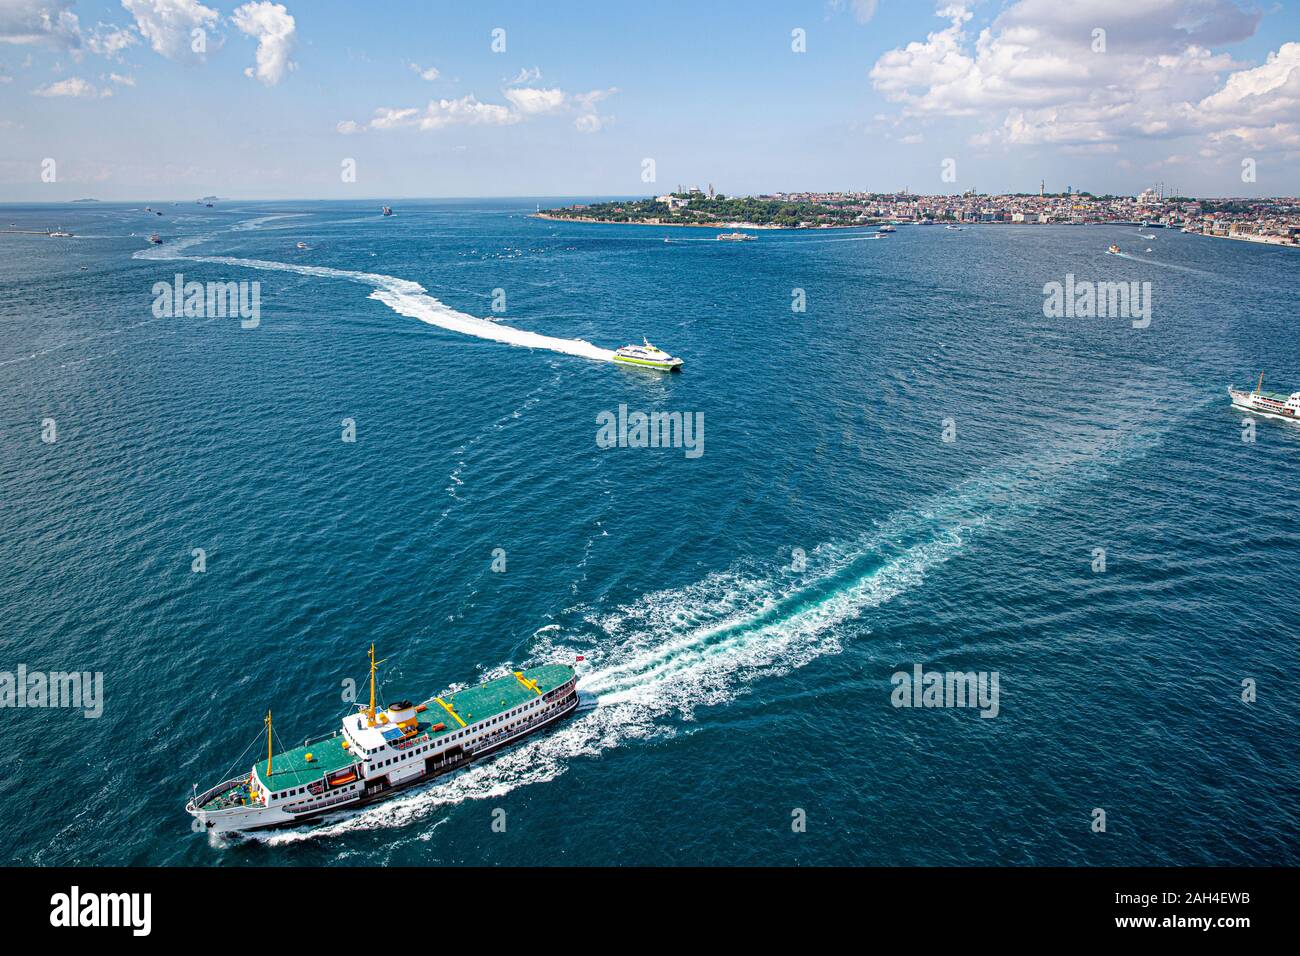 Istanbul, Turkey - June 9, 2013; Istanbul landscape from helicopter. View of City lines ferry (Sehir Hatlari Vapuru) transporting passengers in Istanb Stock Photo